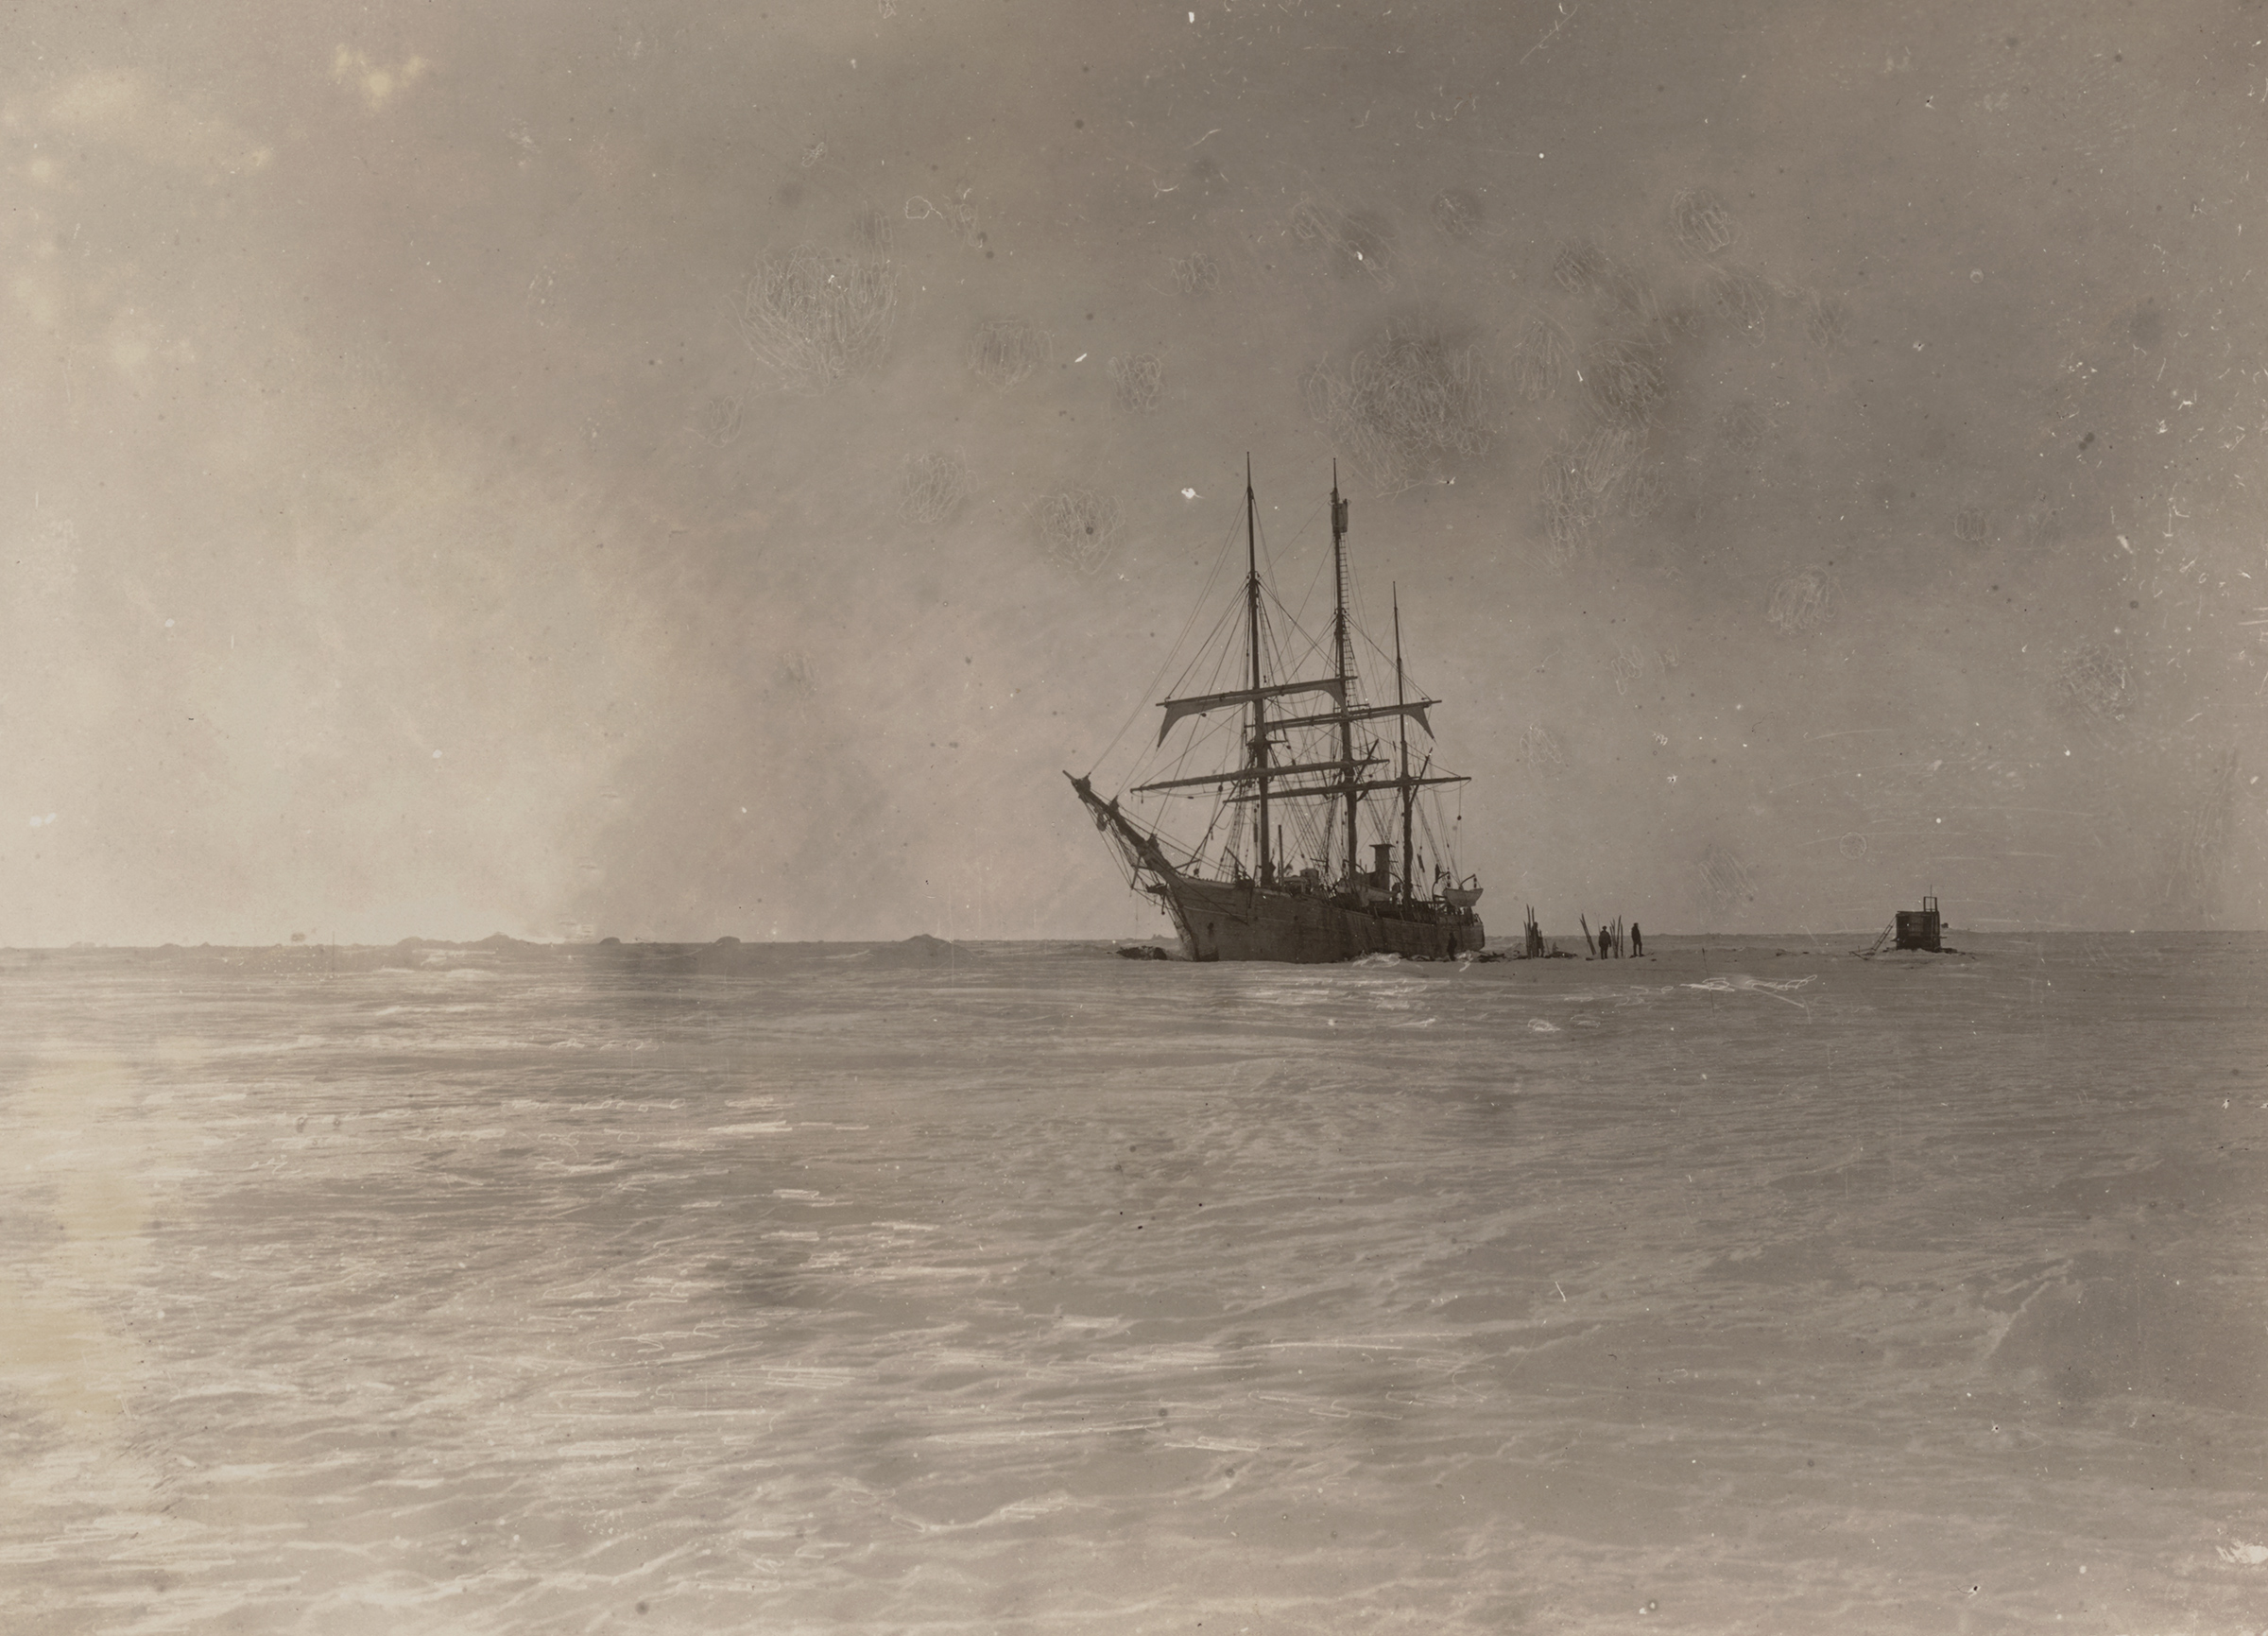 The Belgica, stuck fast in the pack ice of Antarctica's Bellingshausen sea, in 1898. Library of Congress. Frederick A. Cook Society. (Library of Congress / Frederick A. Cook Society)